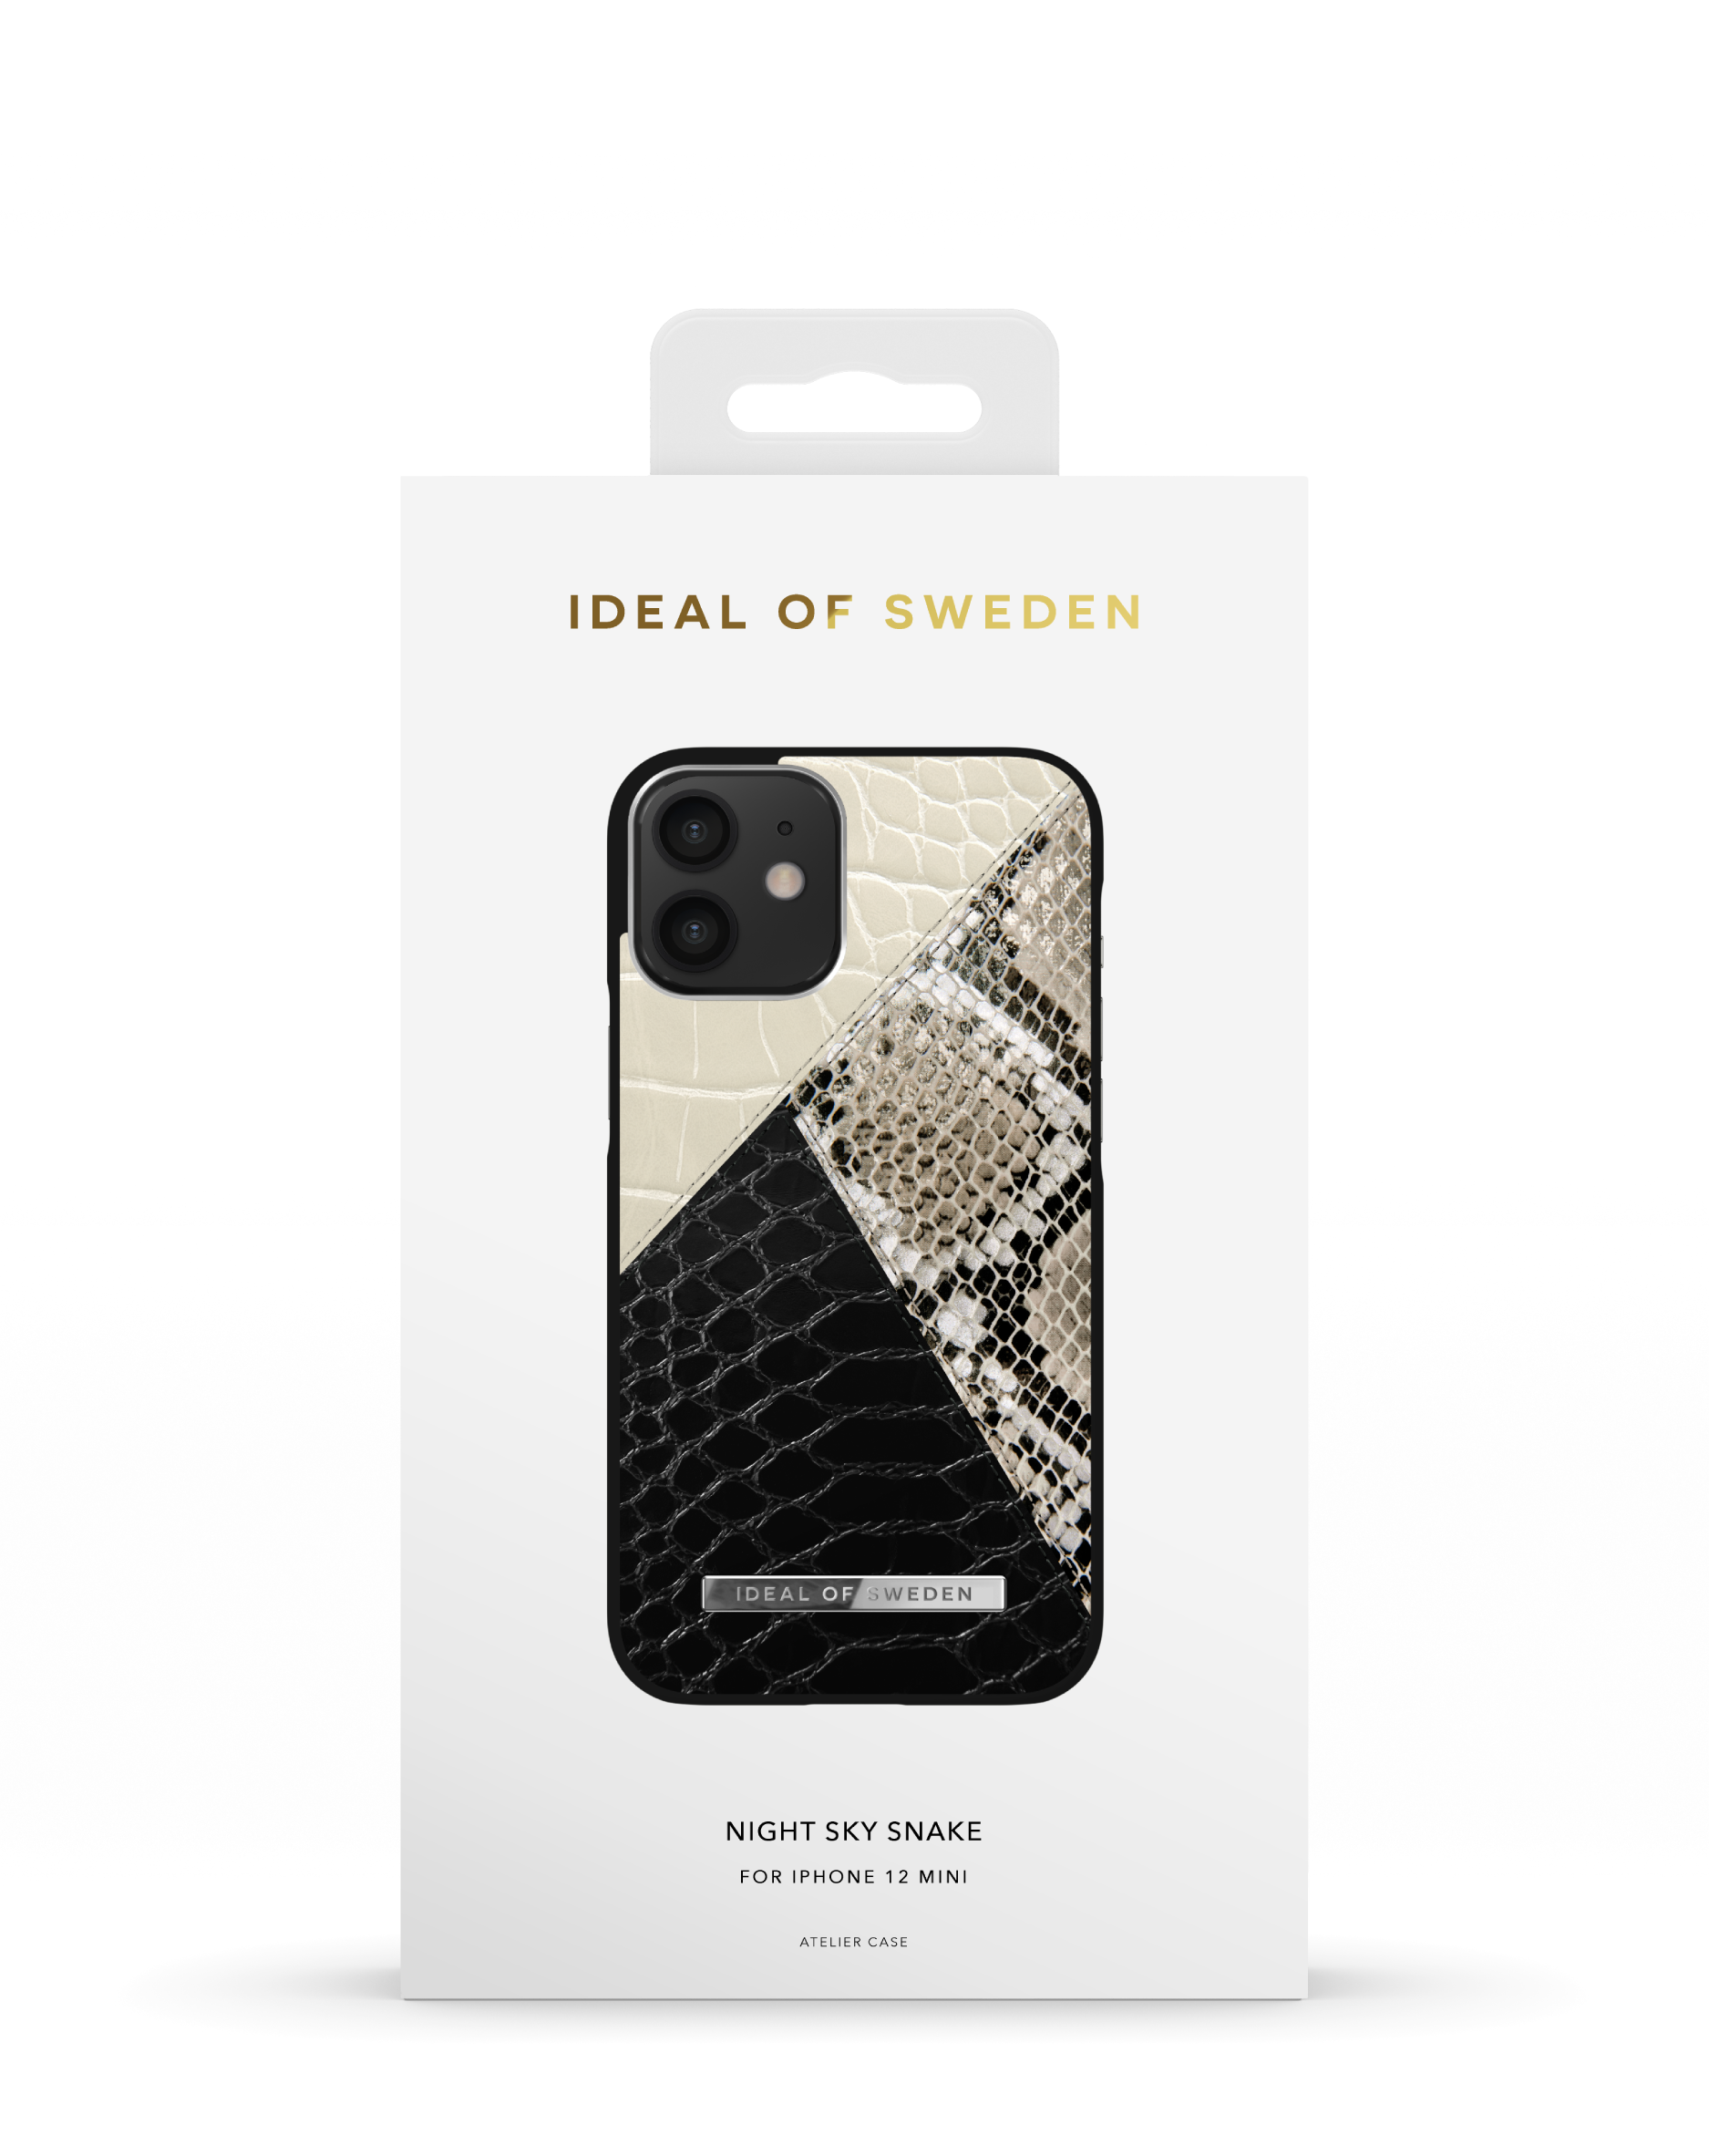 IDEAL 12 SWEDEN mini, Backcover, IDACSS21-I2054-271, OF IPhone Night Apple, Sky Snake